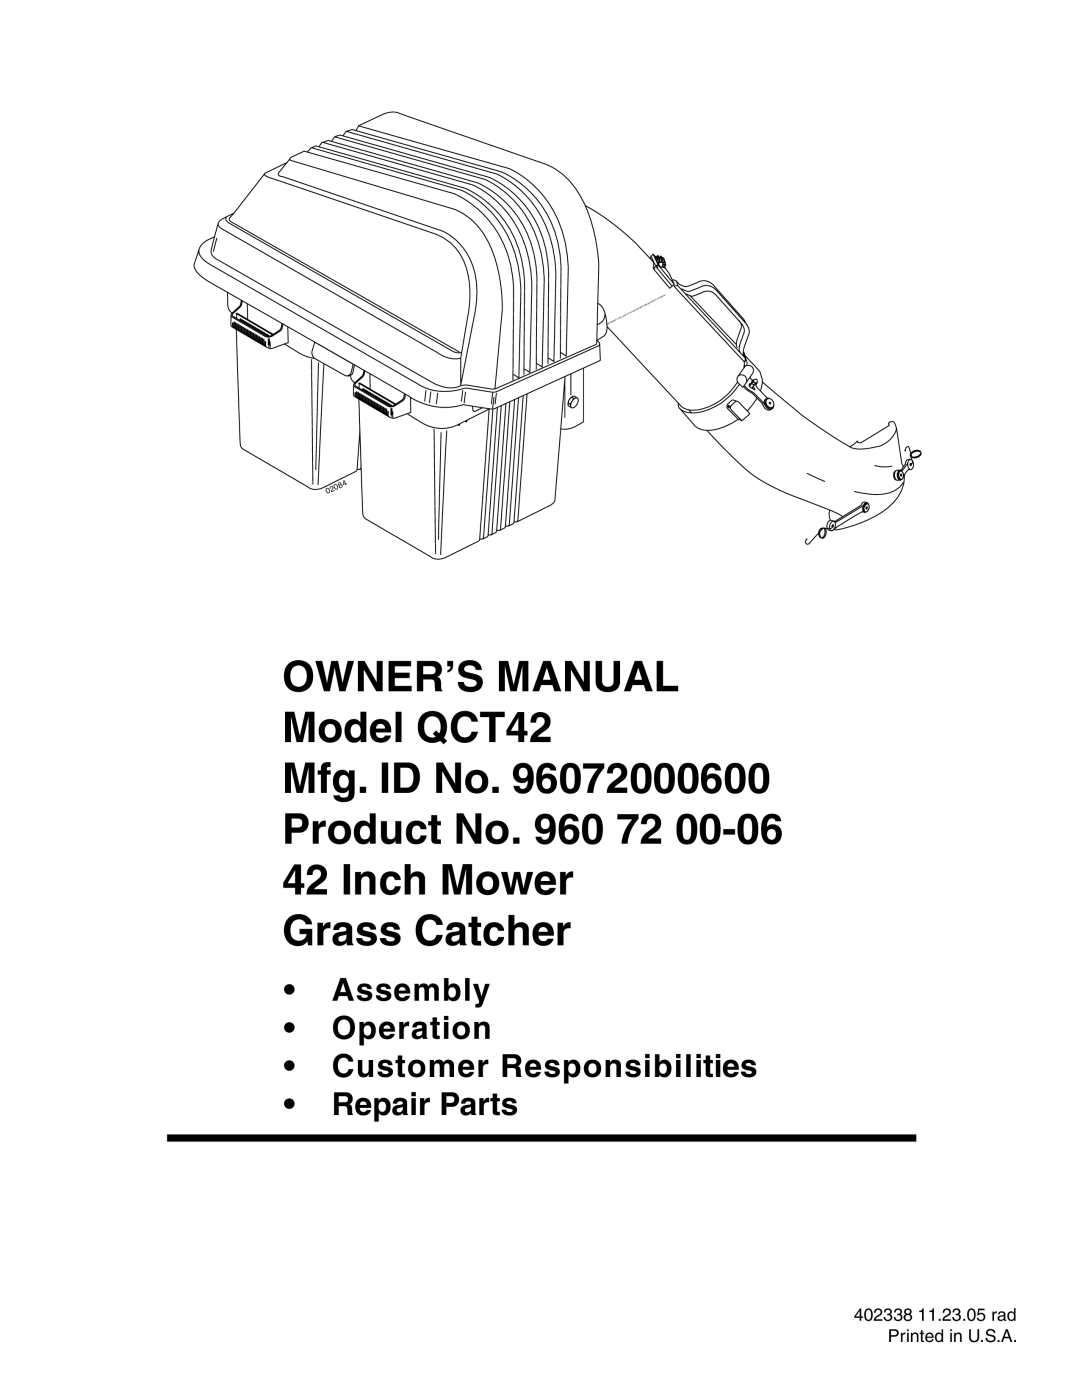 Husqvarna QCT42 owner manual Product No. 960 72 42 Inch Mower Grass Catcher, Assembly Operation Customer Responsibilities 